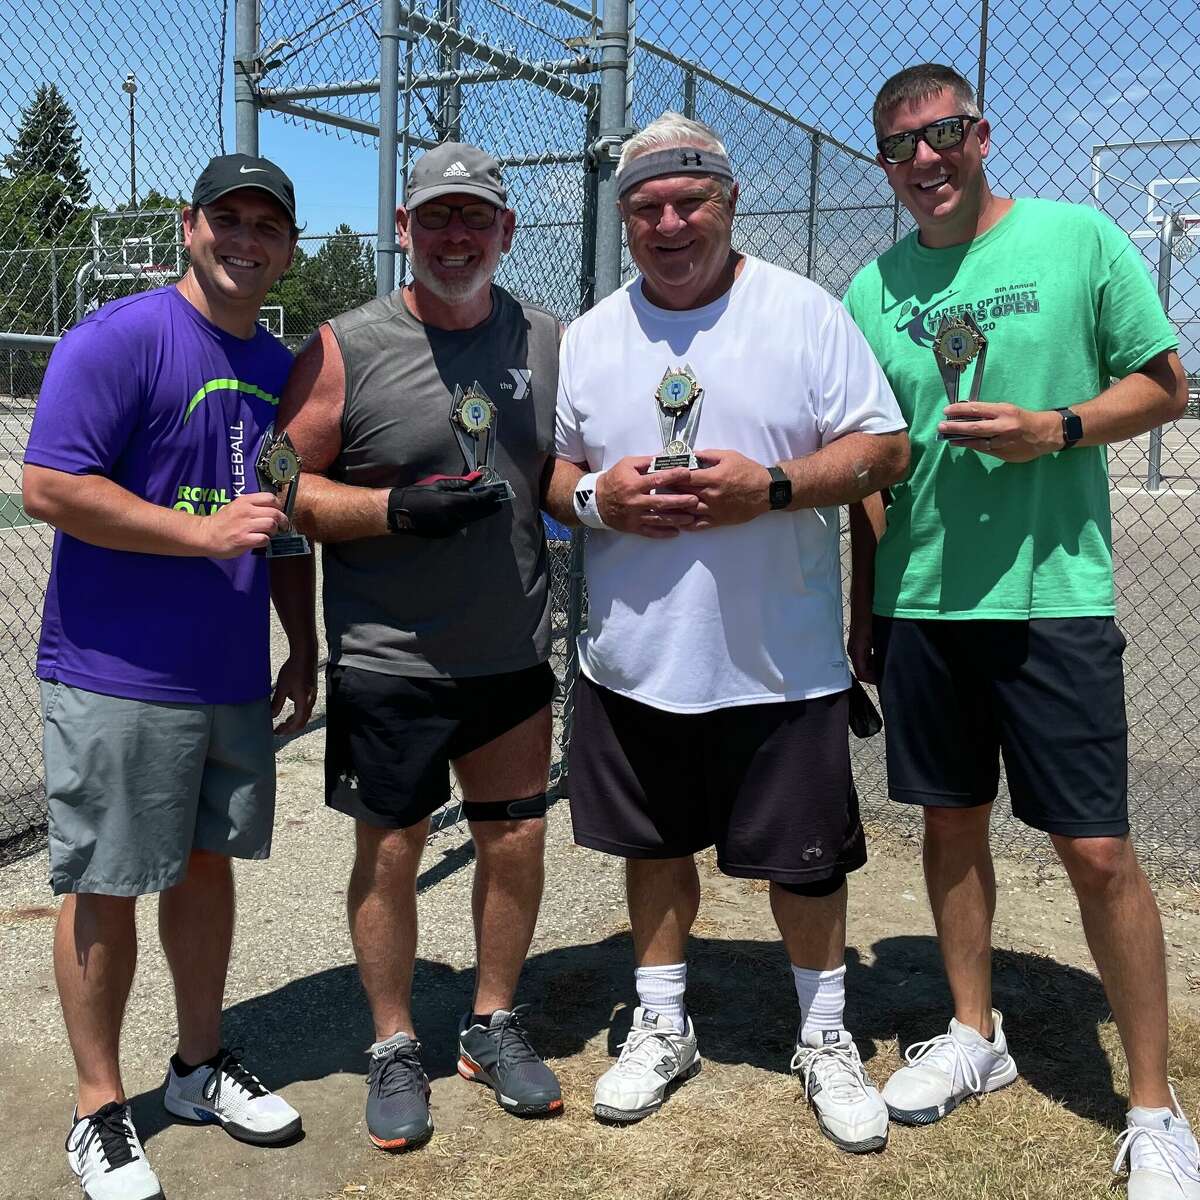 The pickleball tournament champions, Ed Belcrest and Steve Krankoto, along with the runners-up, Kent and Lance Tibbits.